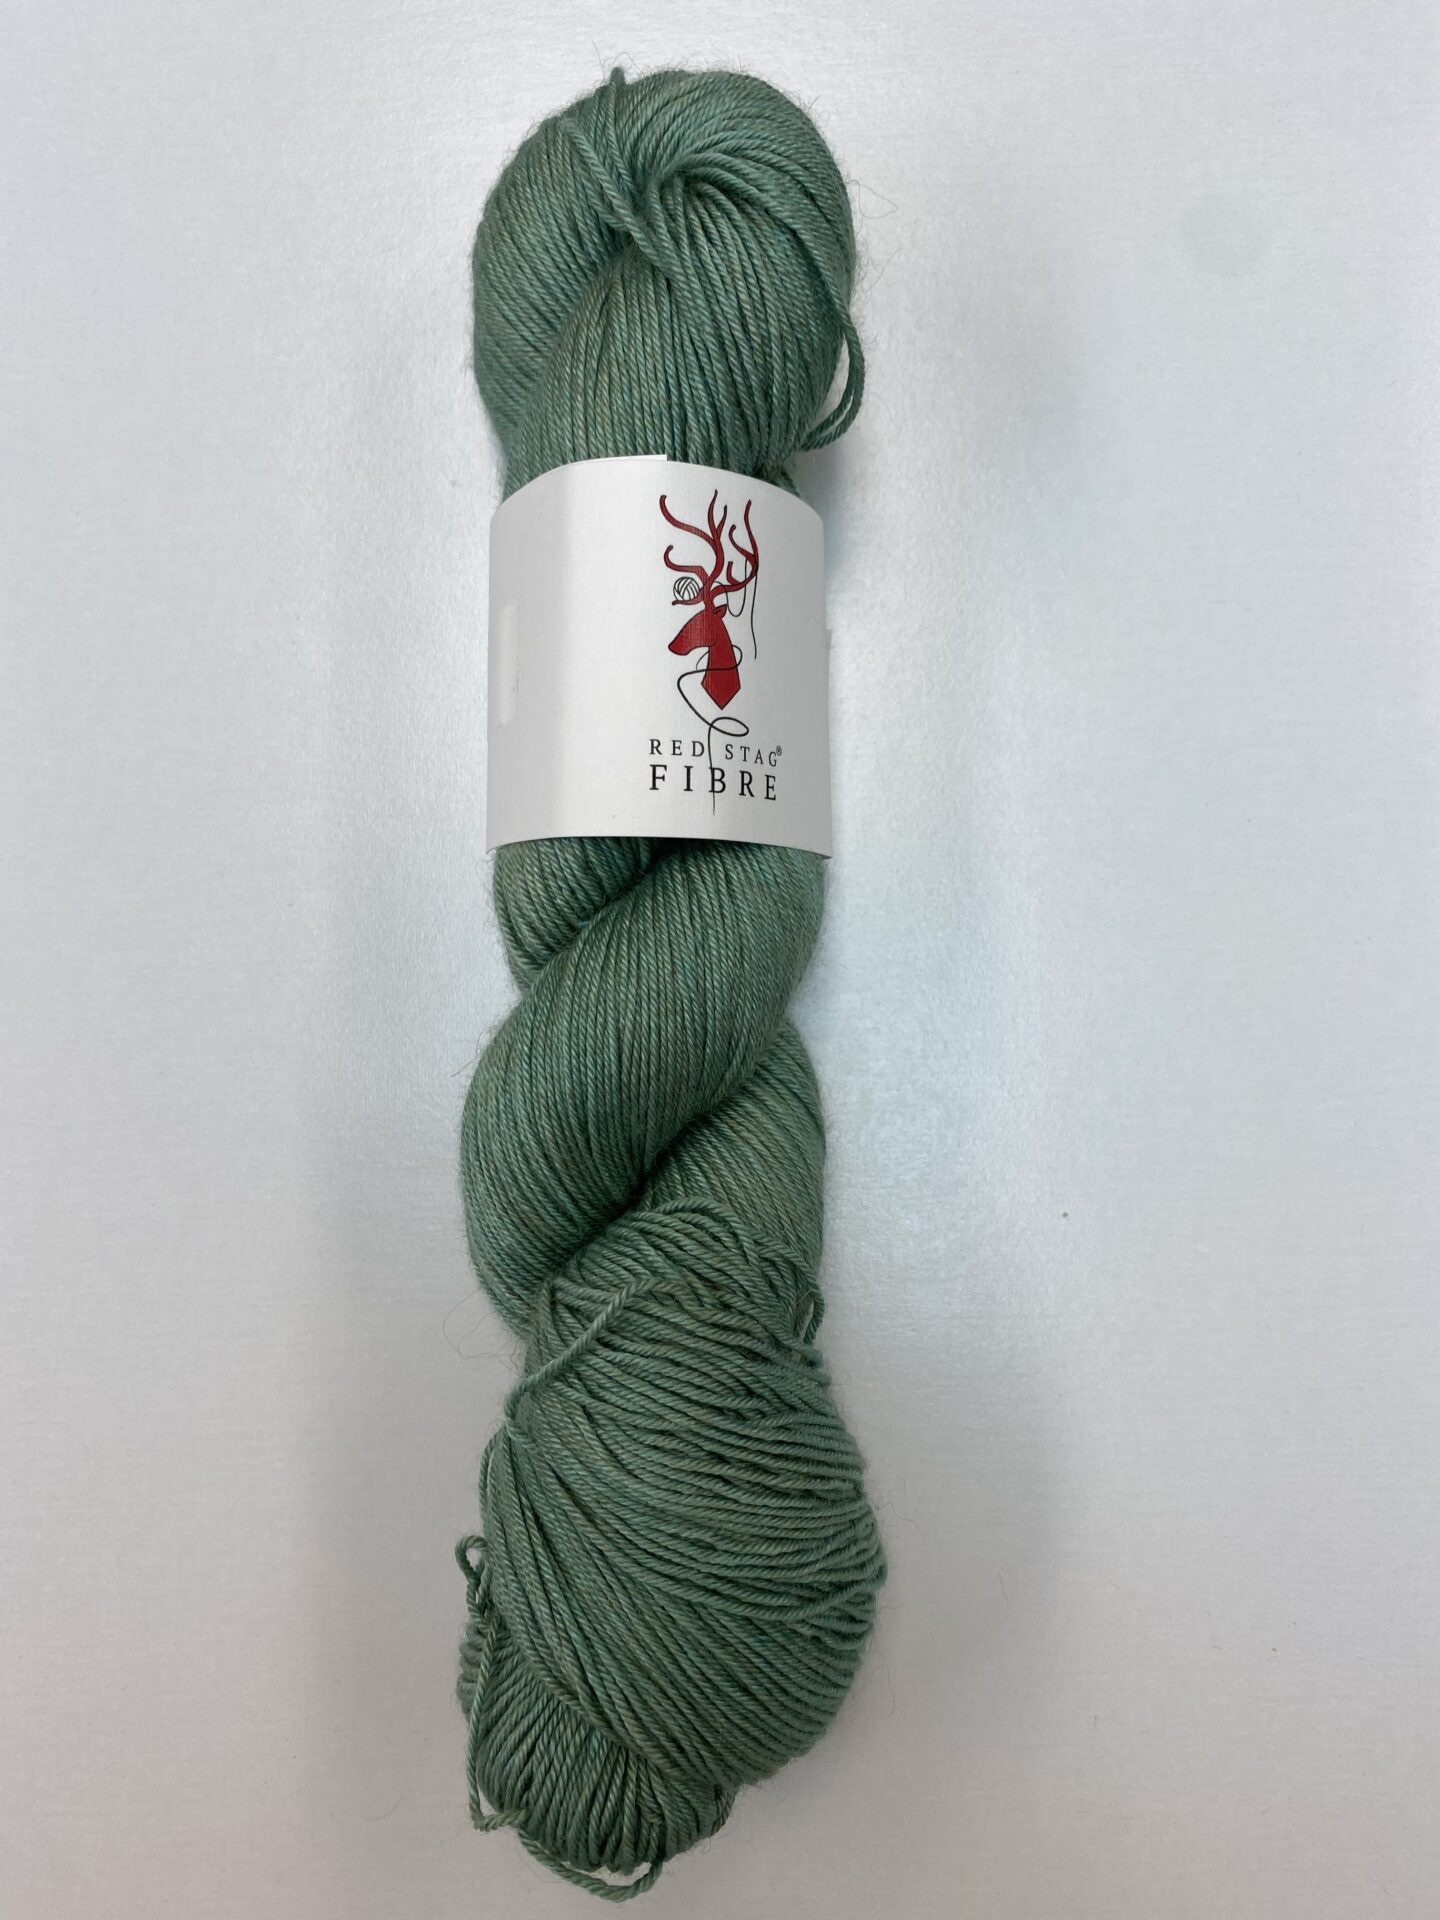 Red Stag Fibre Wool in Green Color